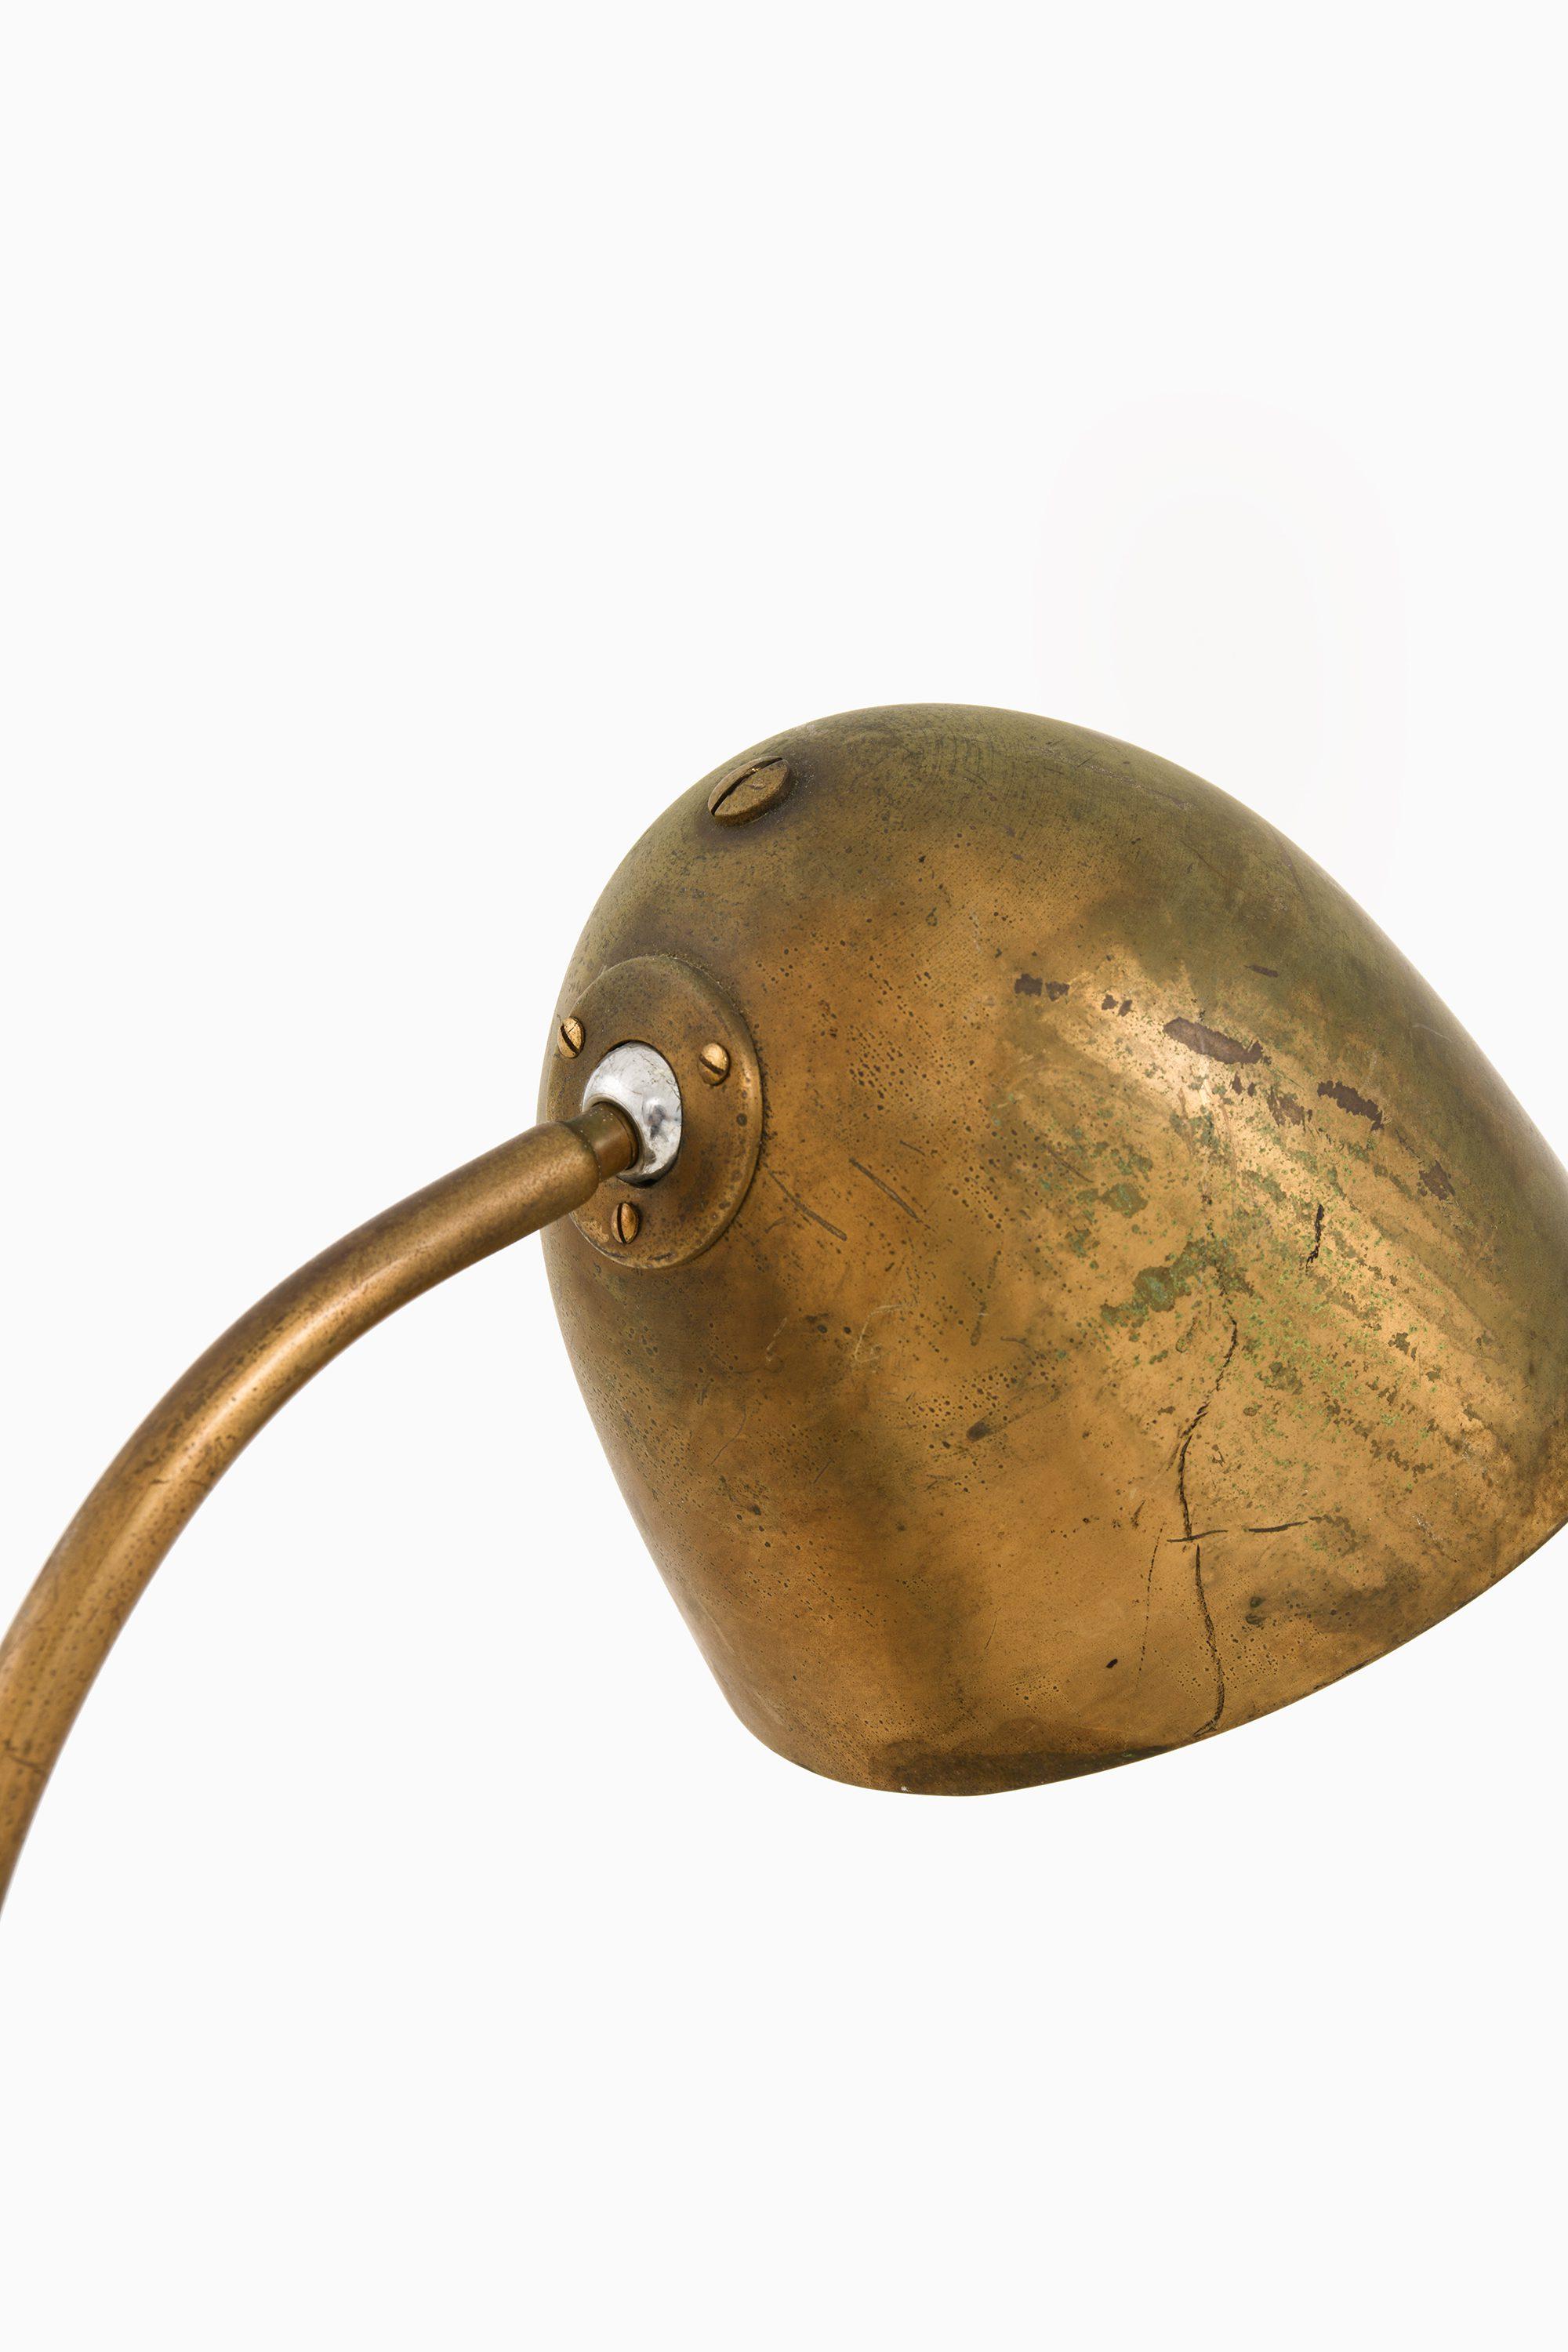 Table Lamp in Brass Attributed To Vilhelm Lauritzen, 1950’s

Additional Information:
Material: Brass
Style: Mid century, Scandinavia
Produced in Denmark
Dimensions (W x D x H): 16 x 32 x 38 cm
Condition: Good vintage condition, with heavy signs of